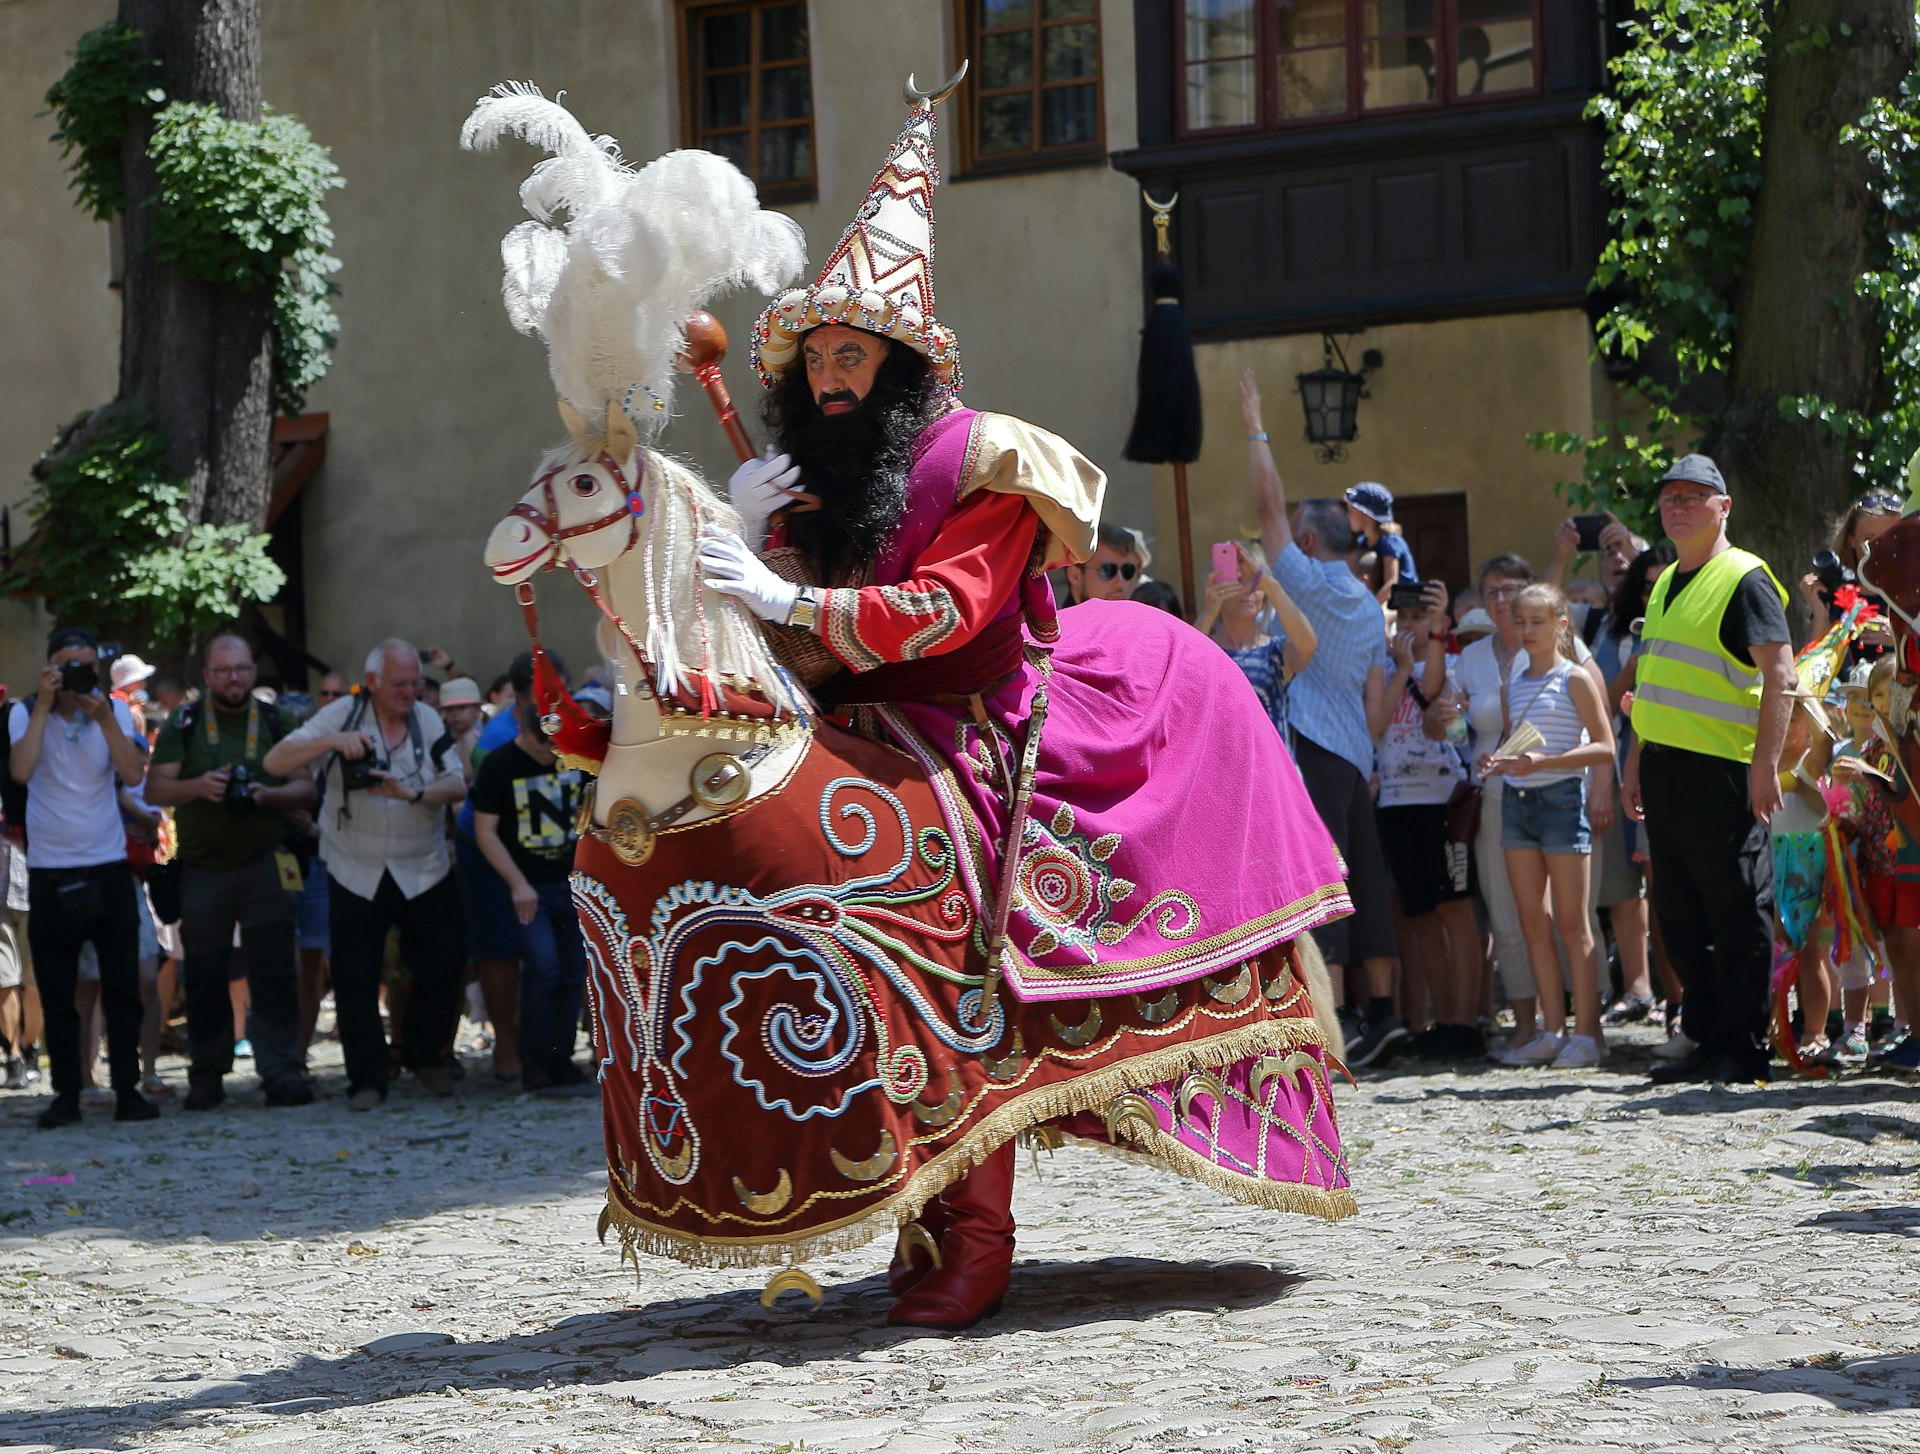 A man in a purple costume and feathered headdress at the traditional Lajkonik Festival in Kraków, Malopolskie, Poland